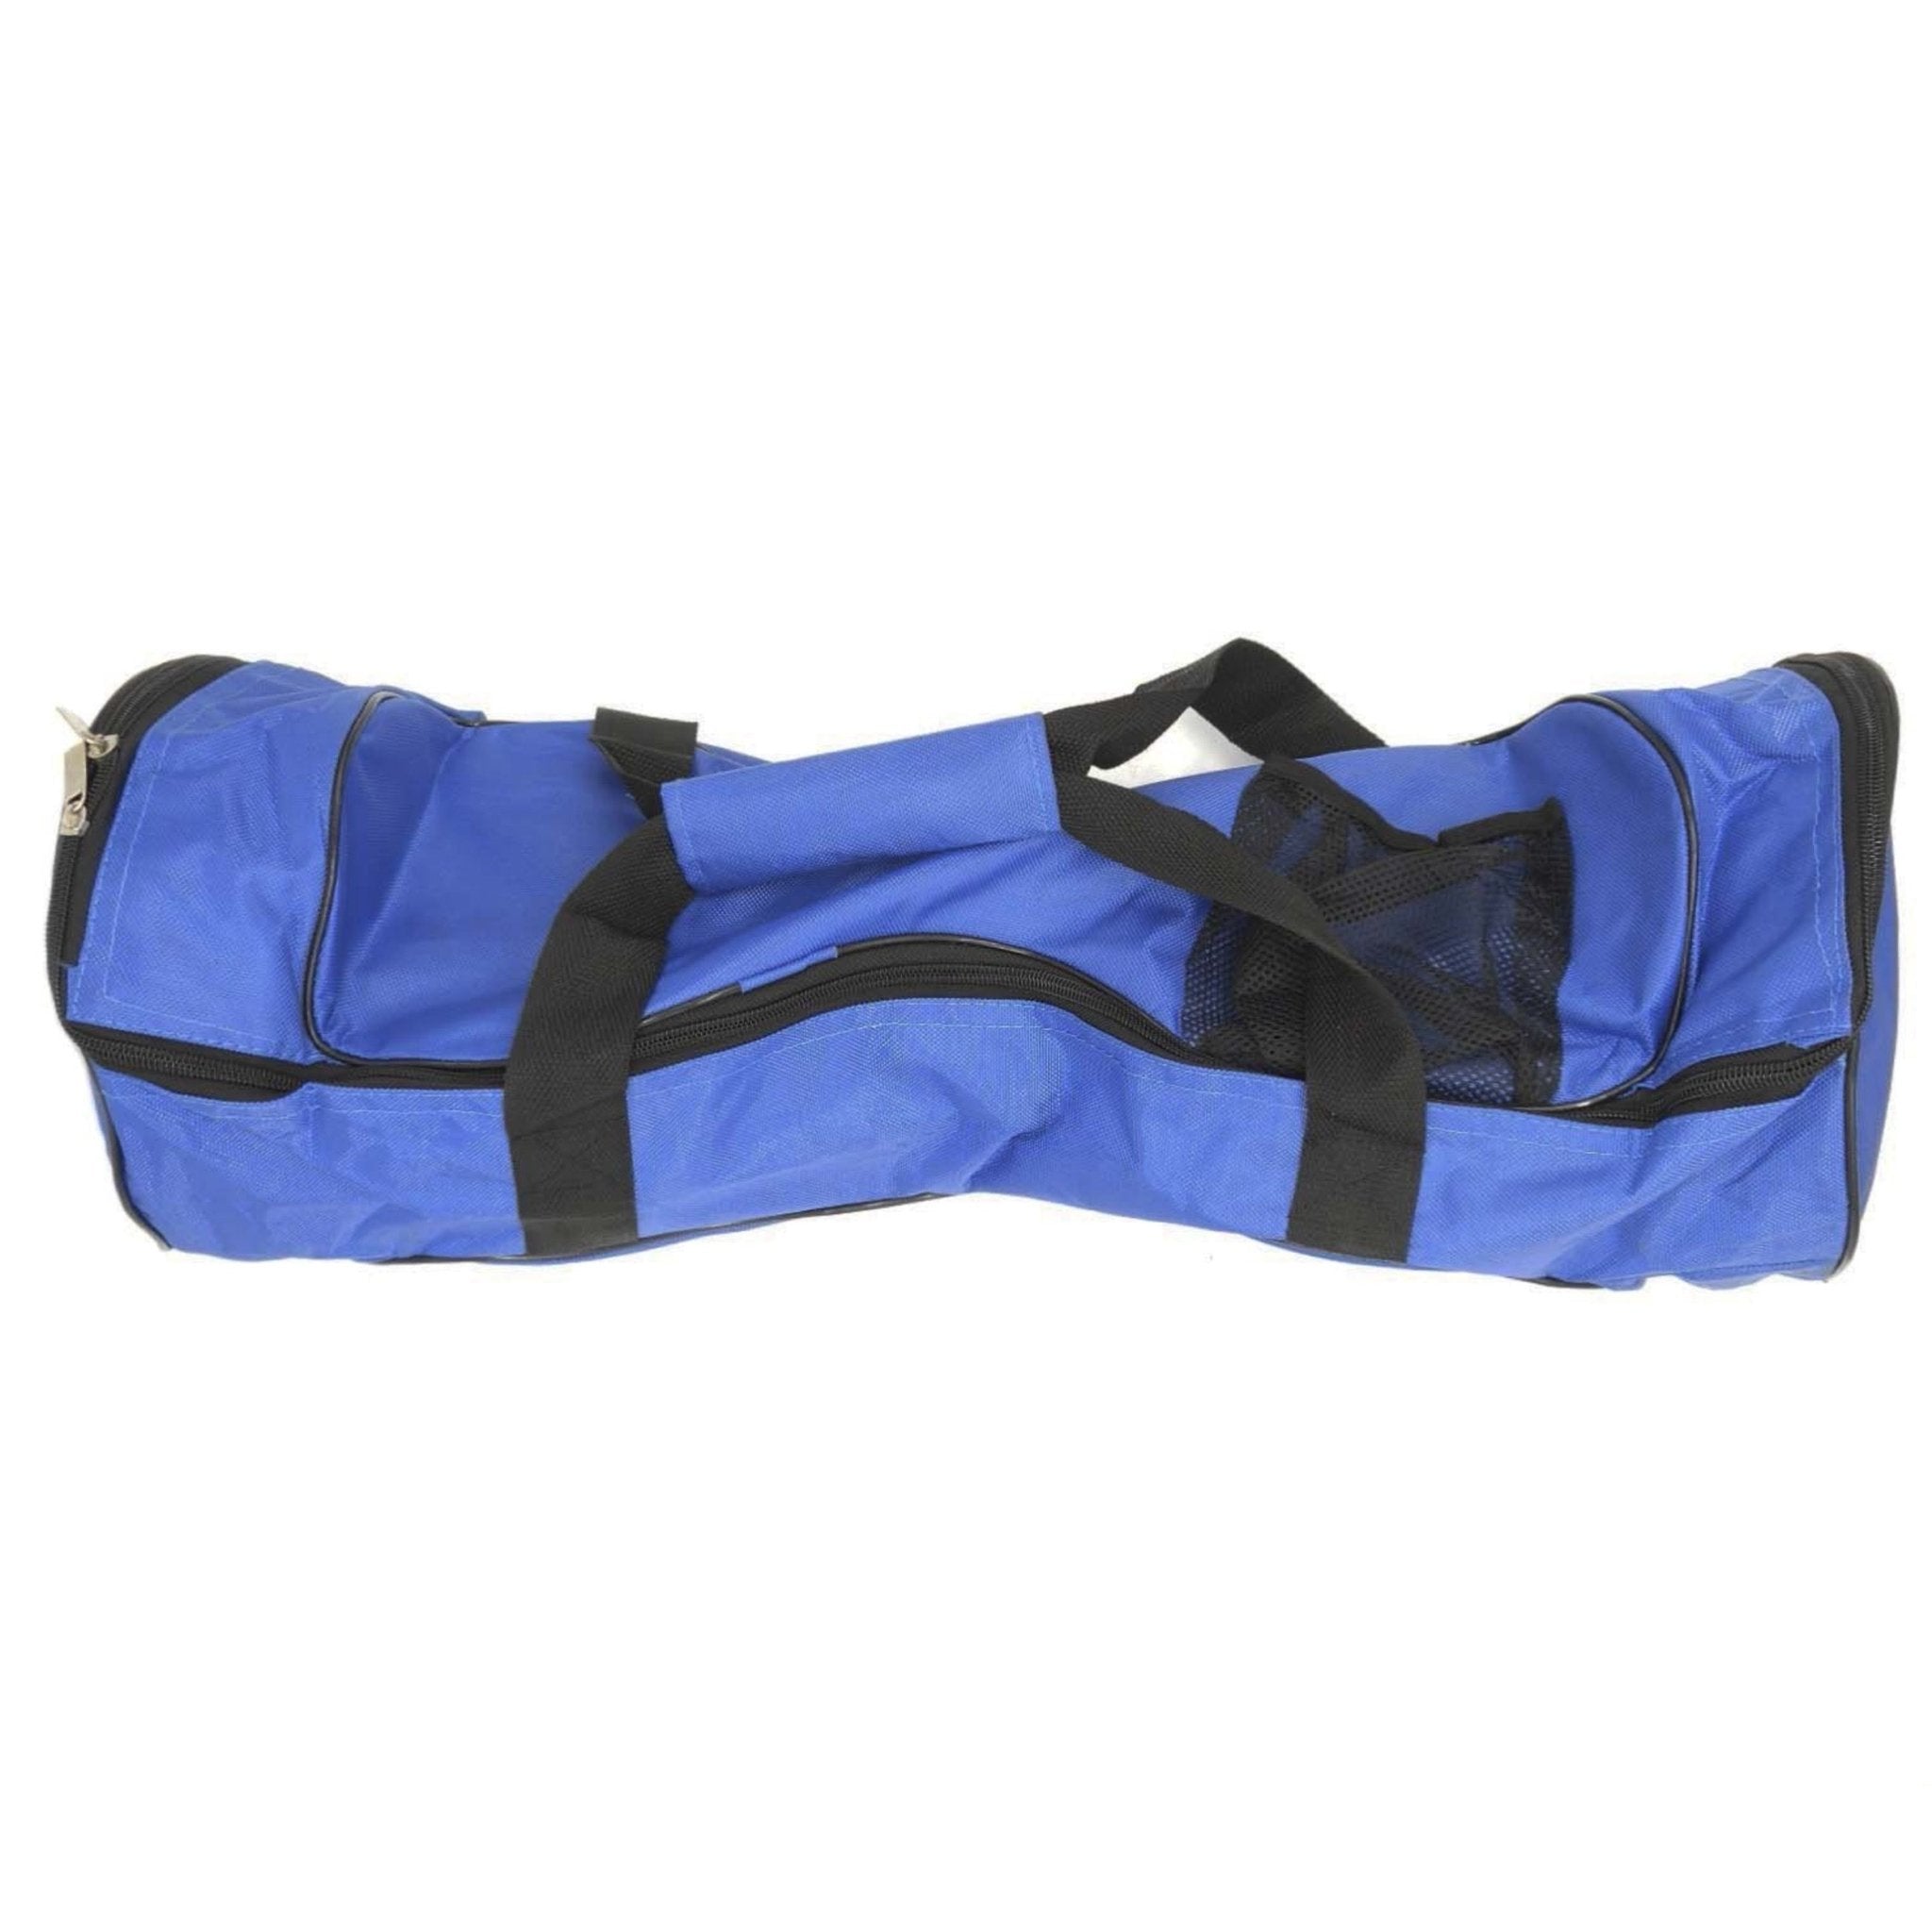 GOTRAX Hoverboard Carrying Bag for Gotrax and Non-Gotrax Hoverboards - GOTRAX